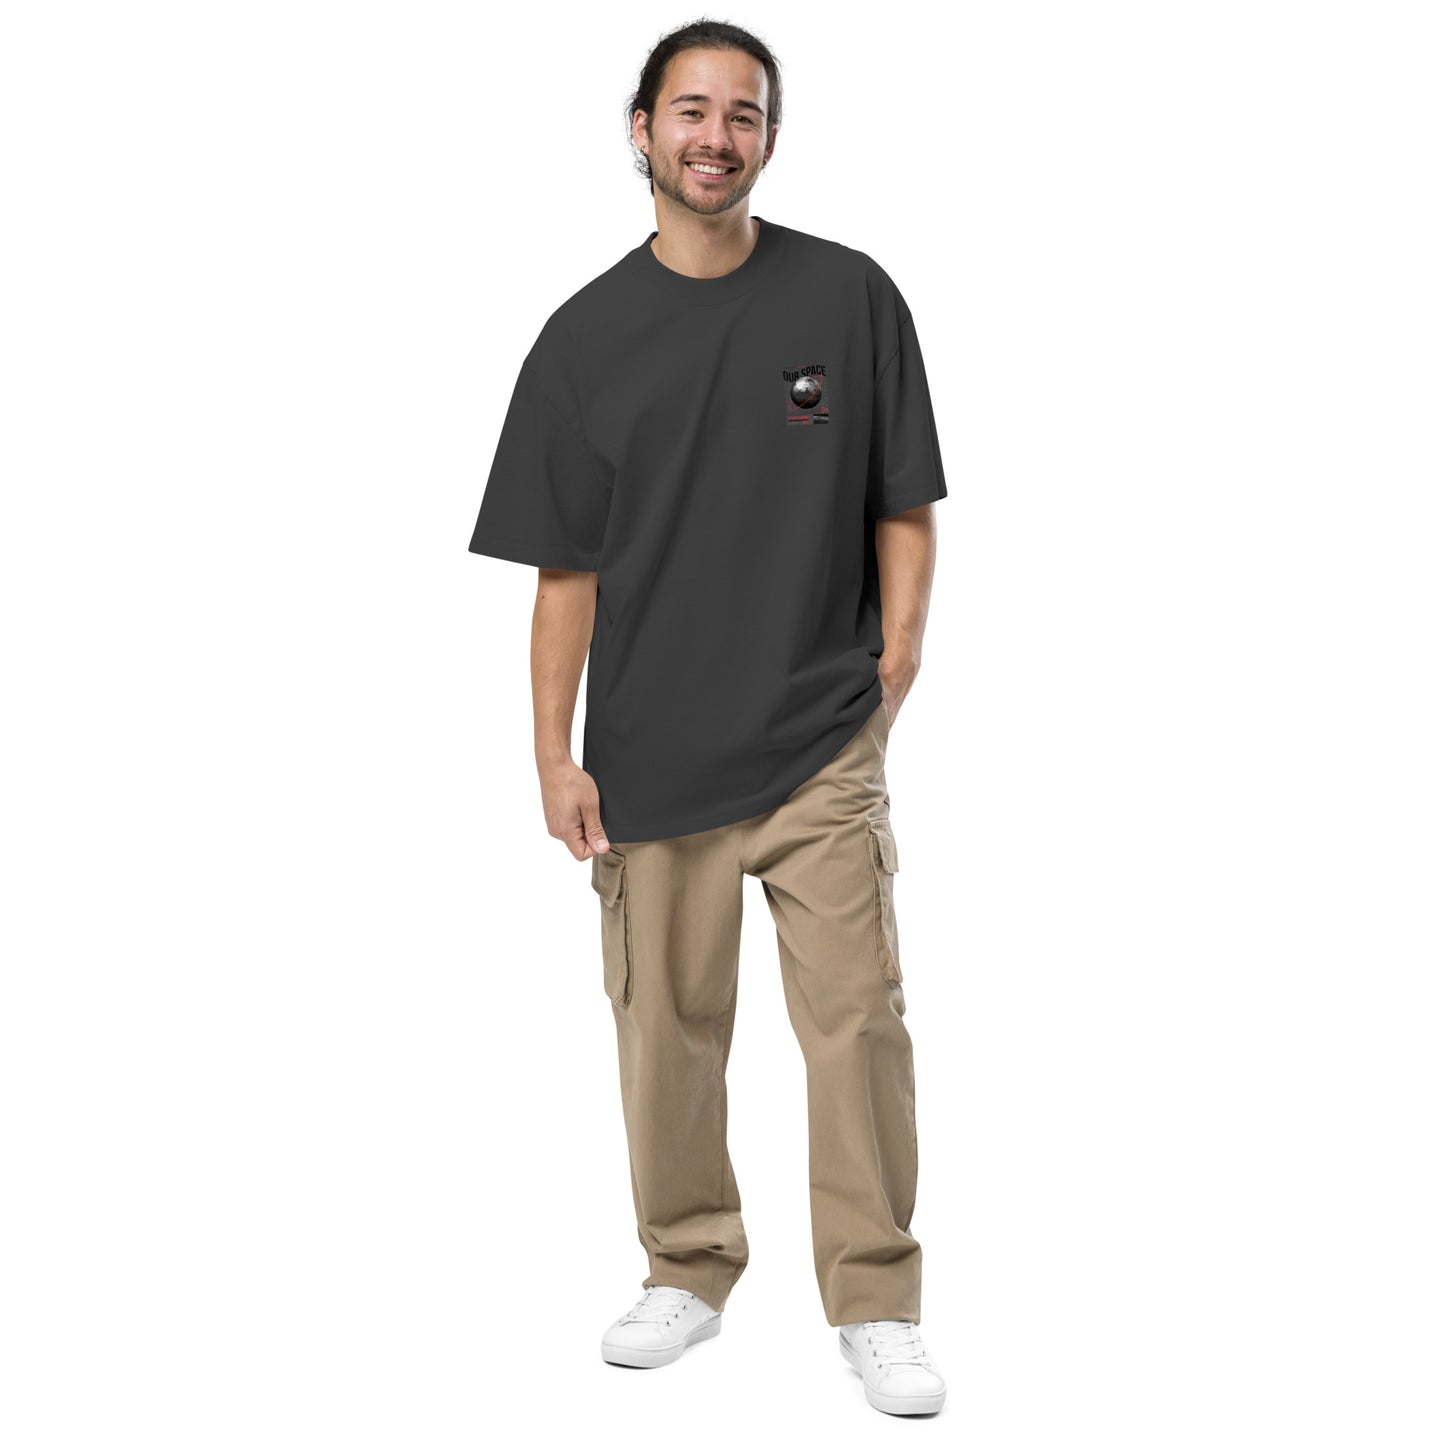 Our Space Men's Oversized T-shirt